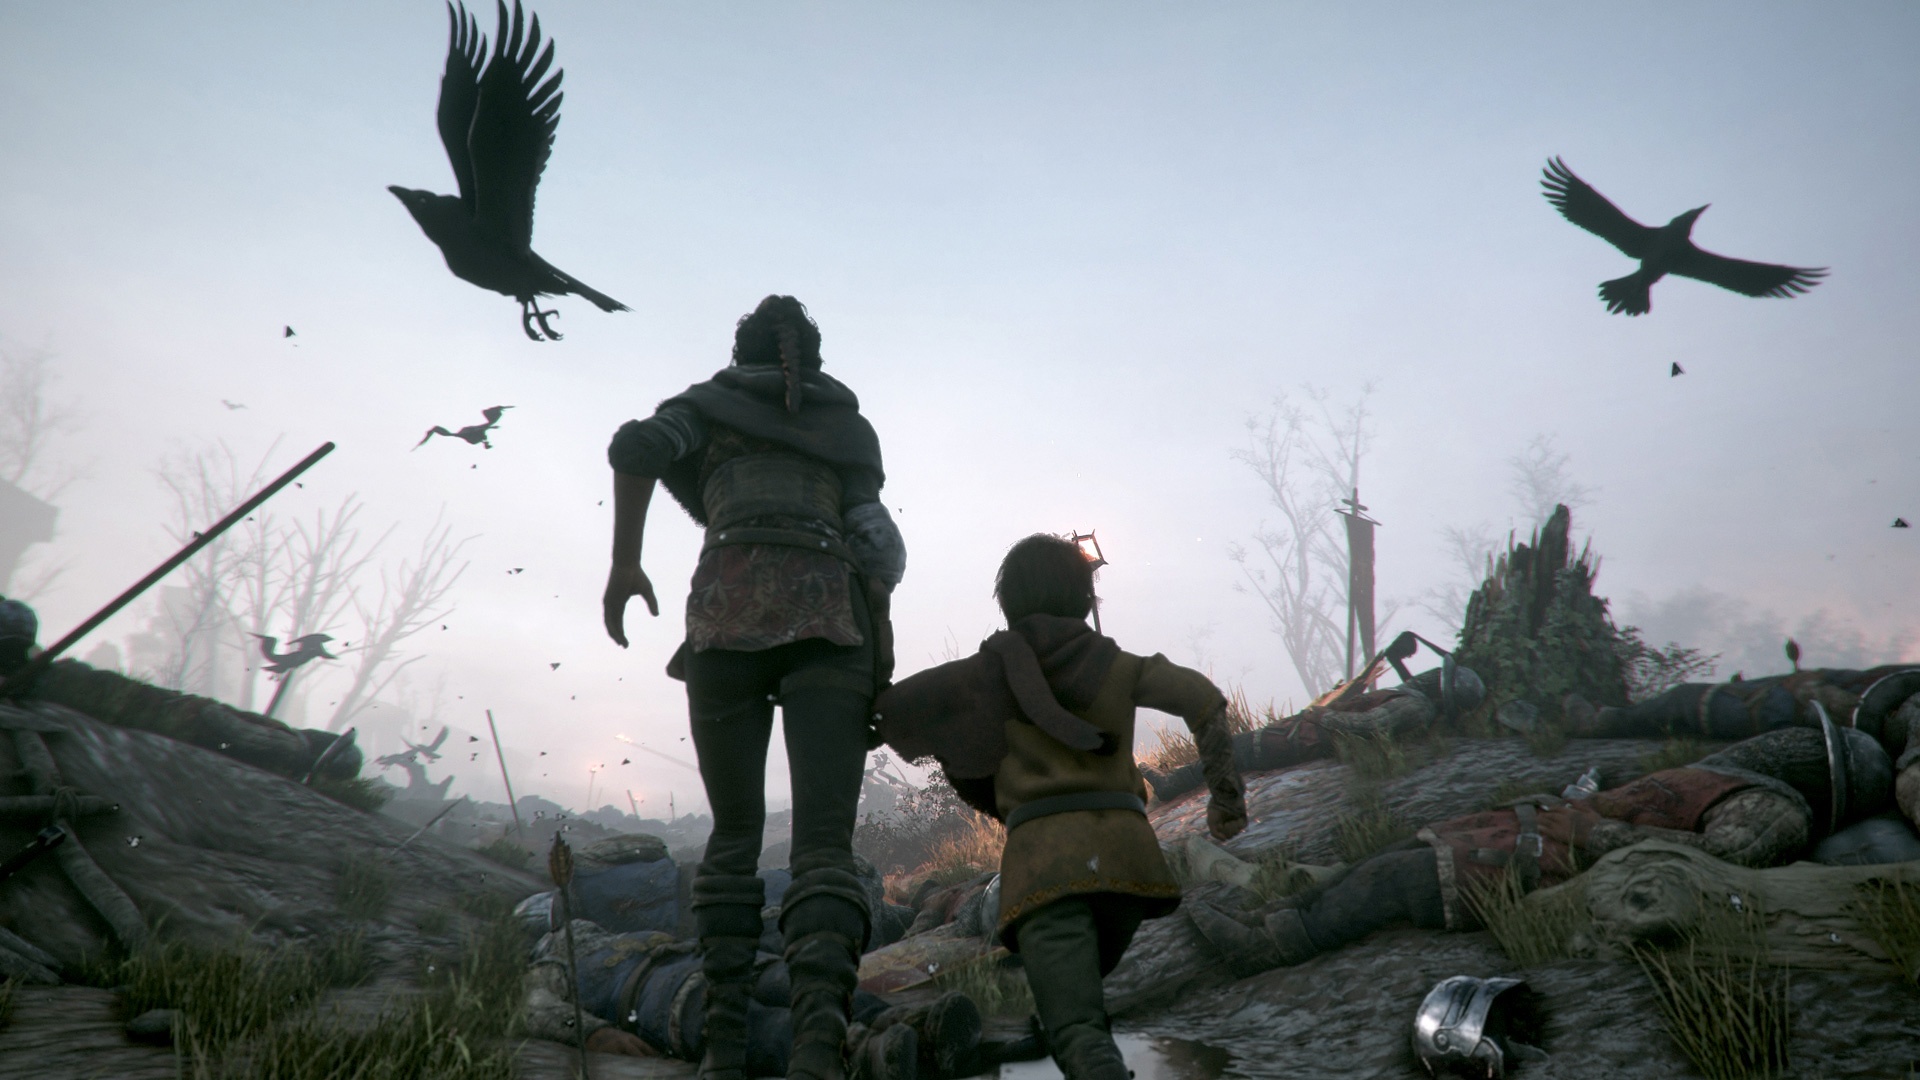 Deaf Game Review - A Plague Tale: Innocence - Can I Play That?